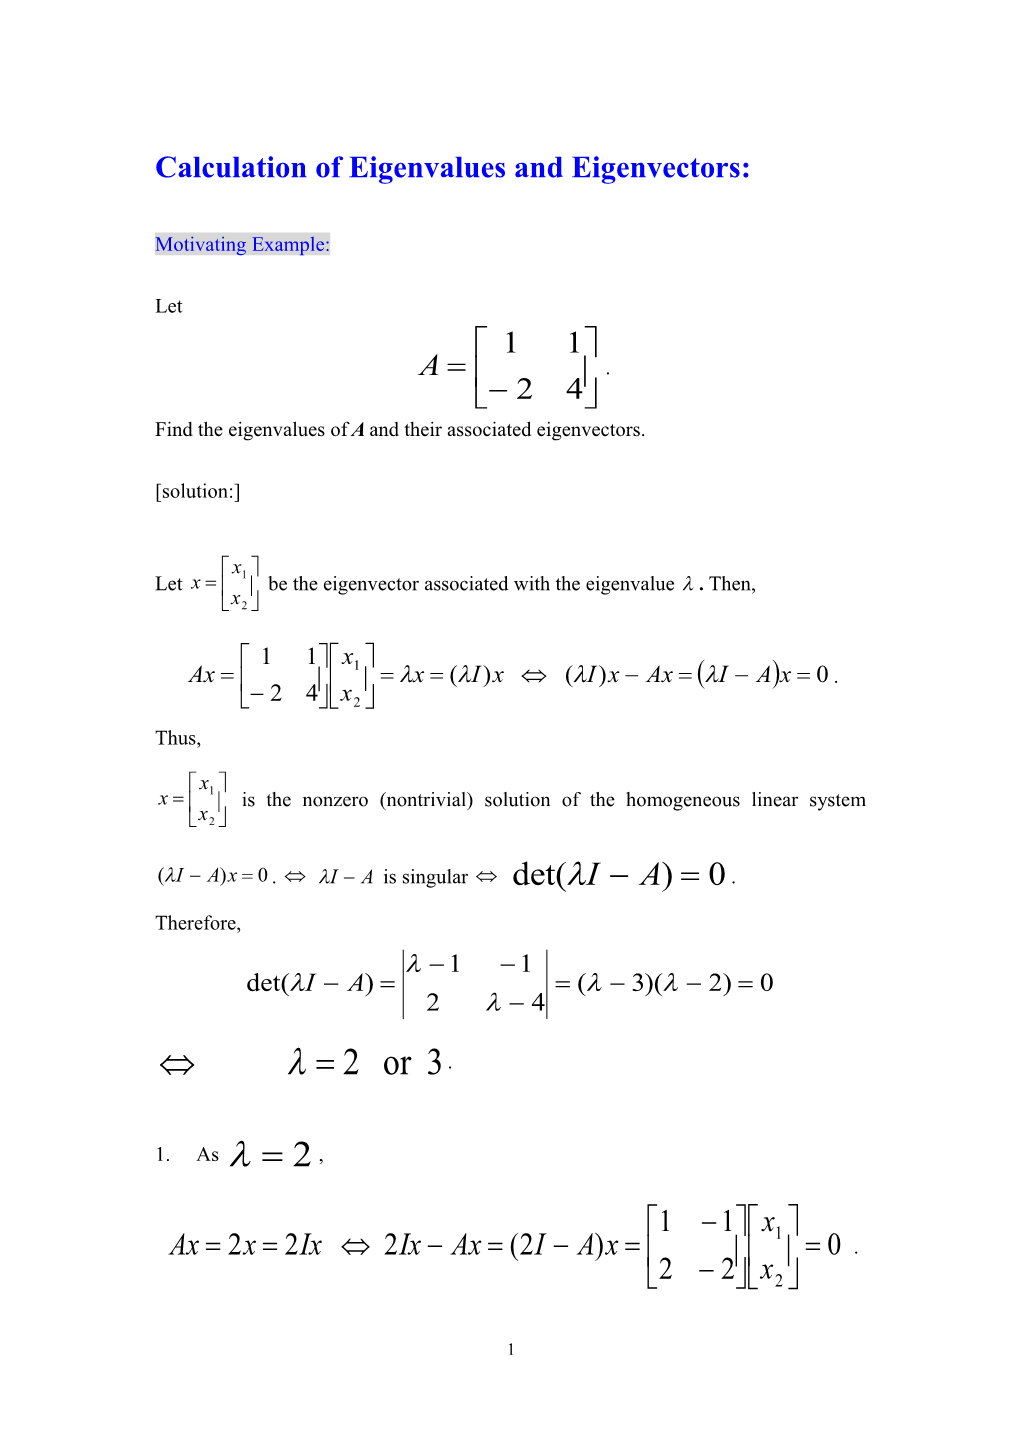 Calculation of Eigenvalues and Eigenvectors